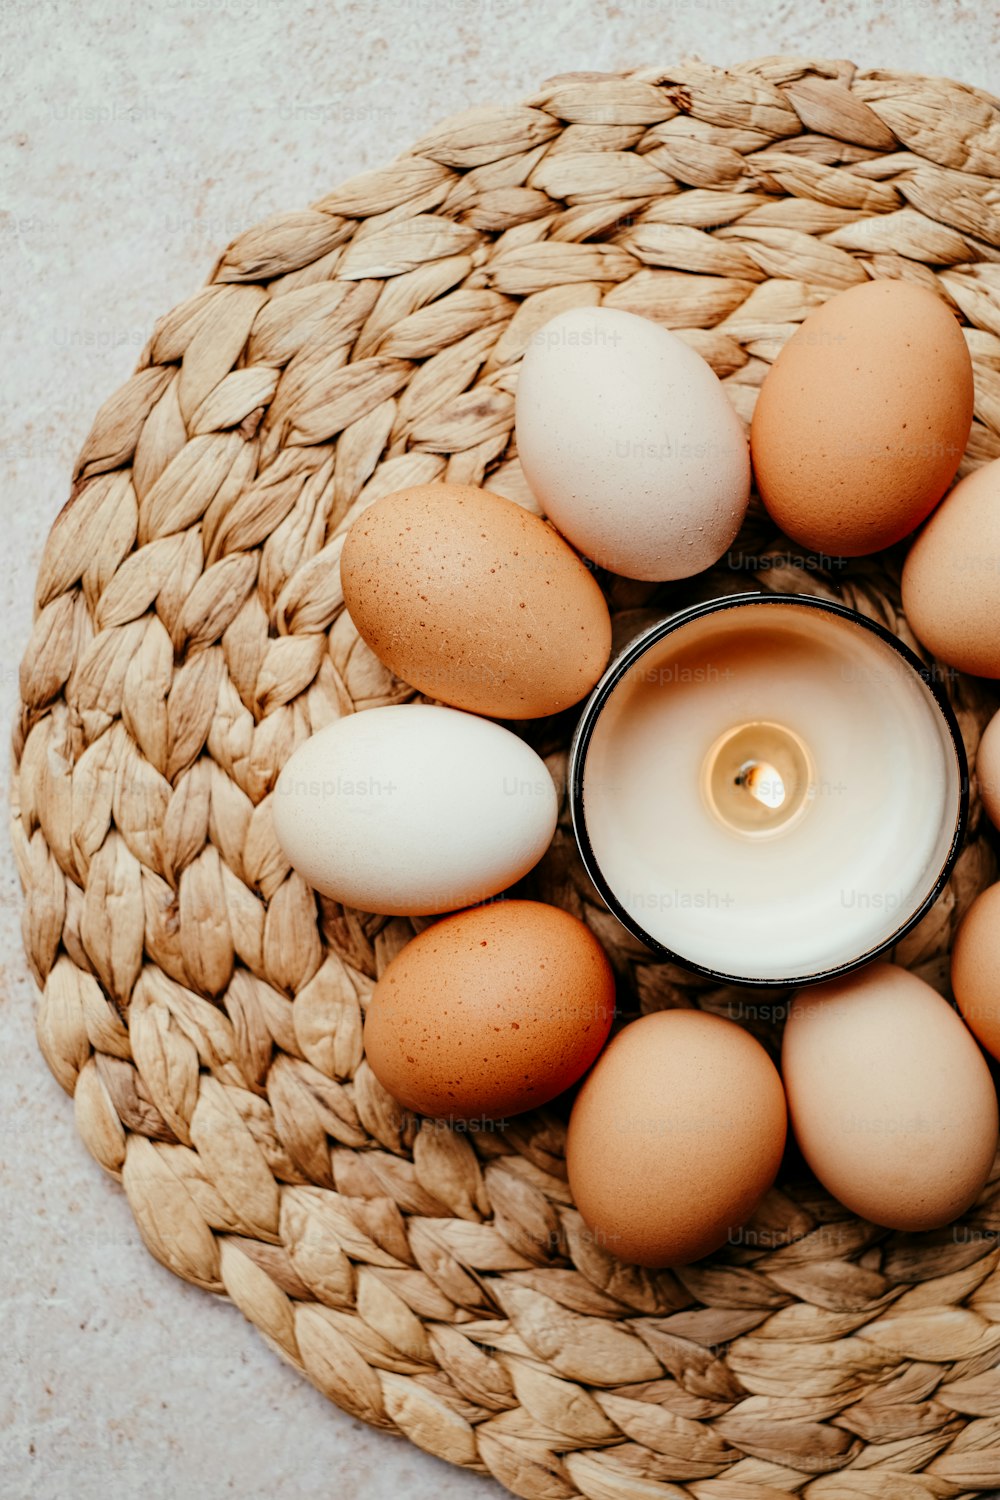 a candle is surrounded by eggs in a basket